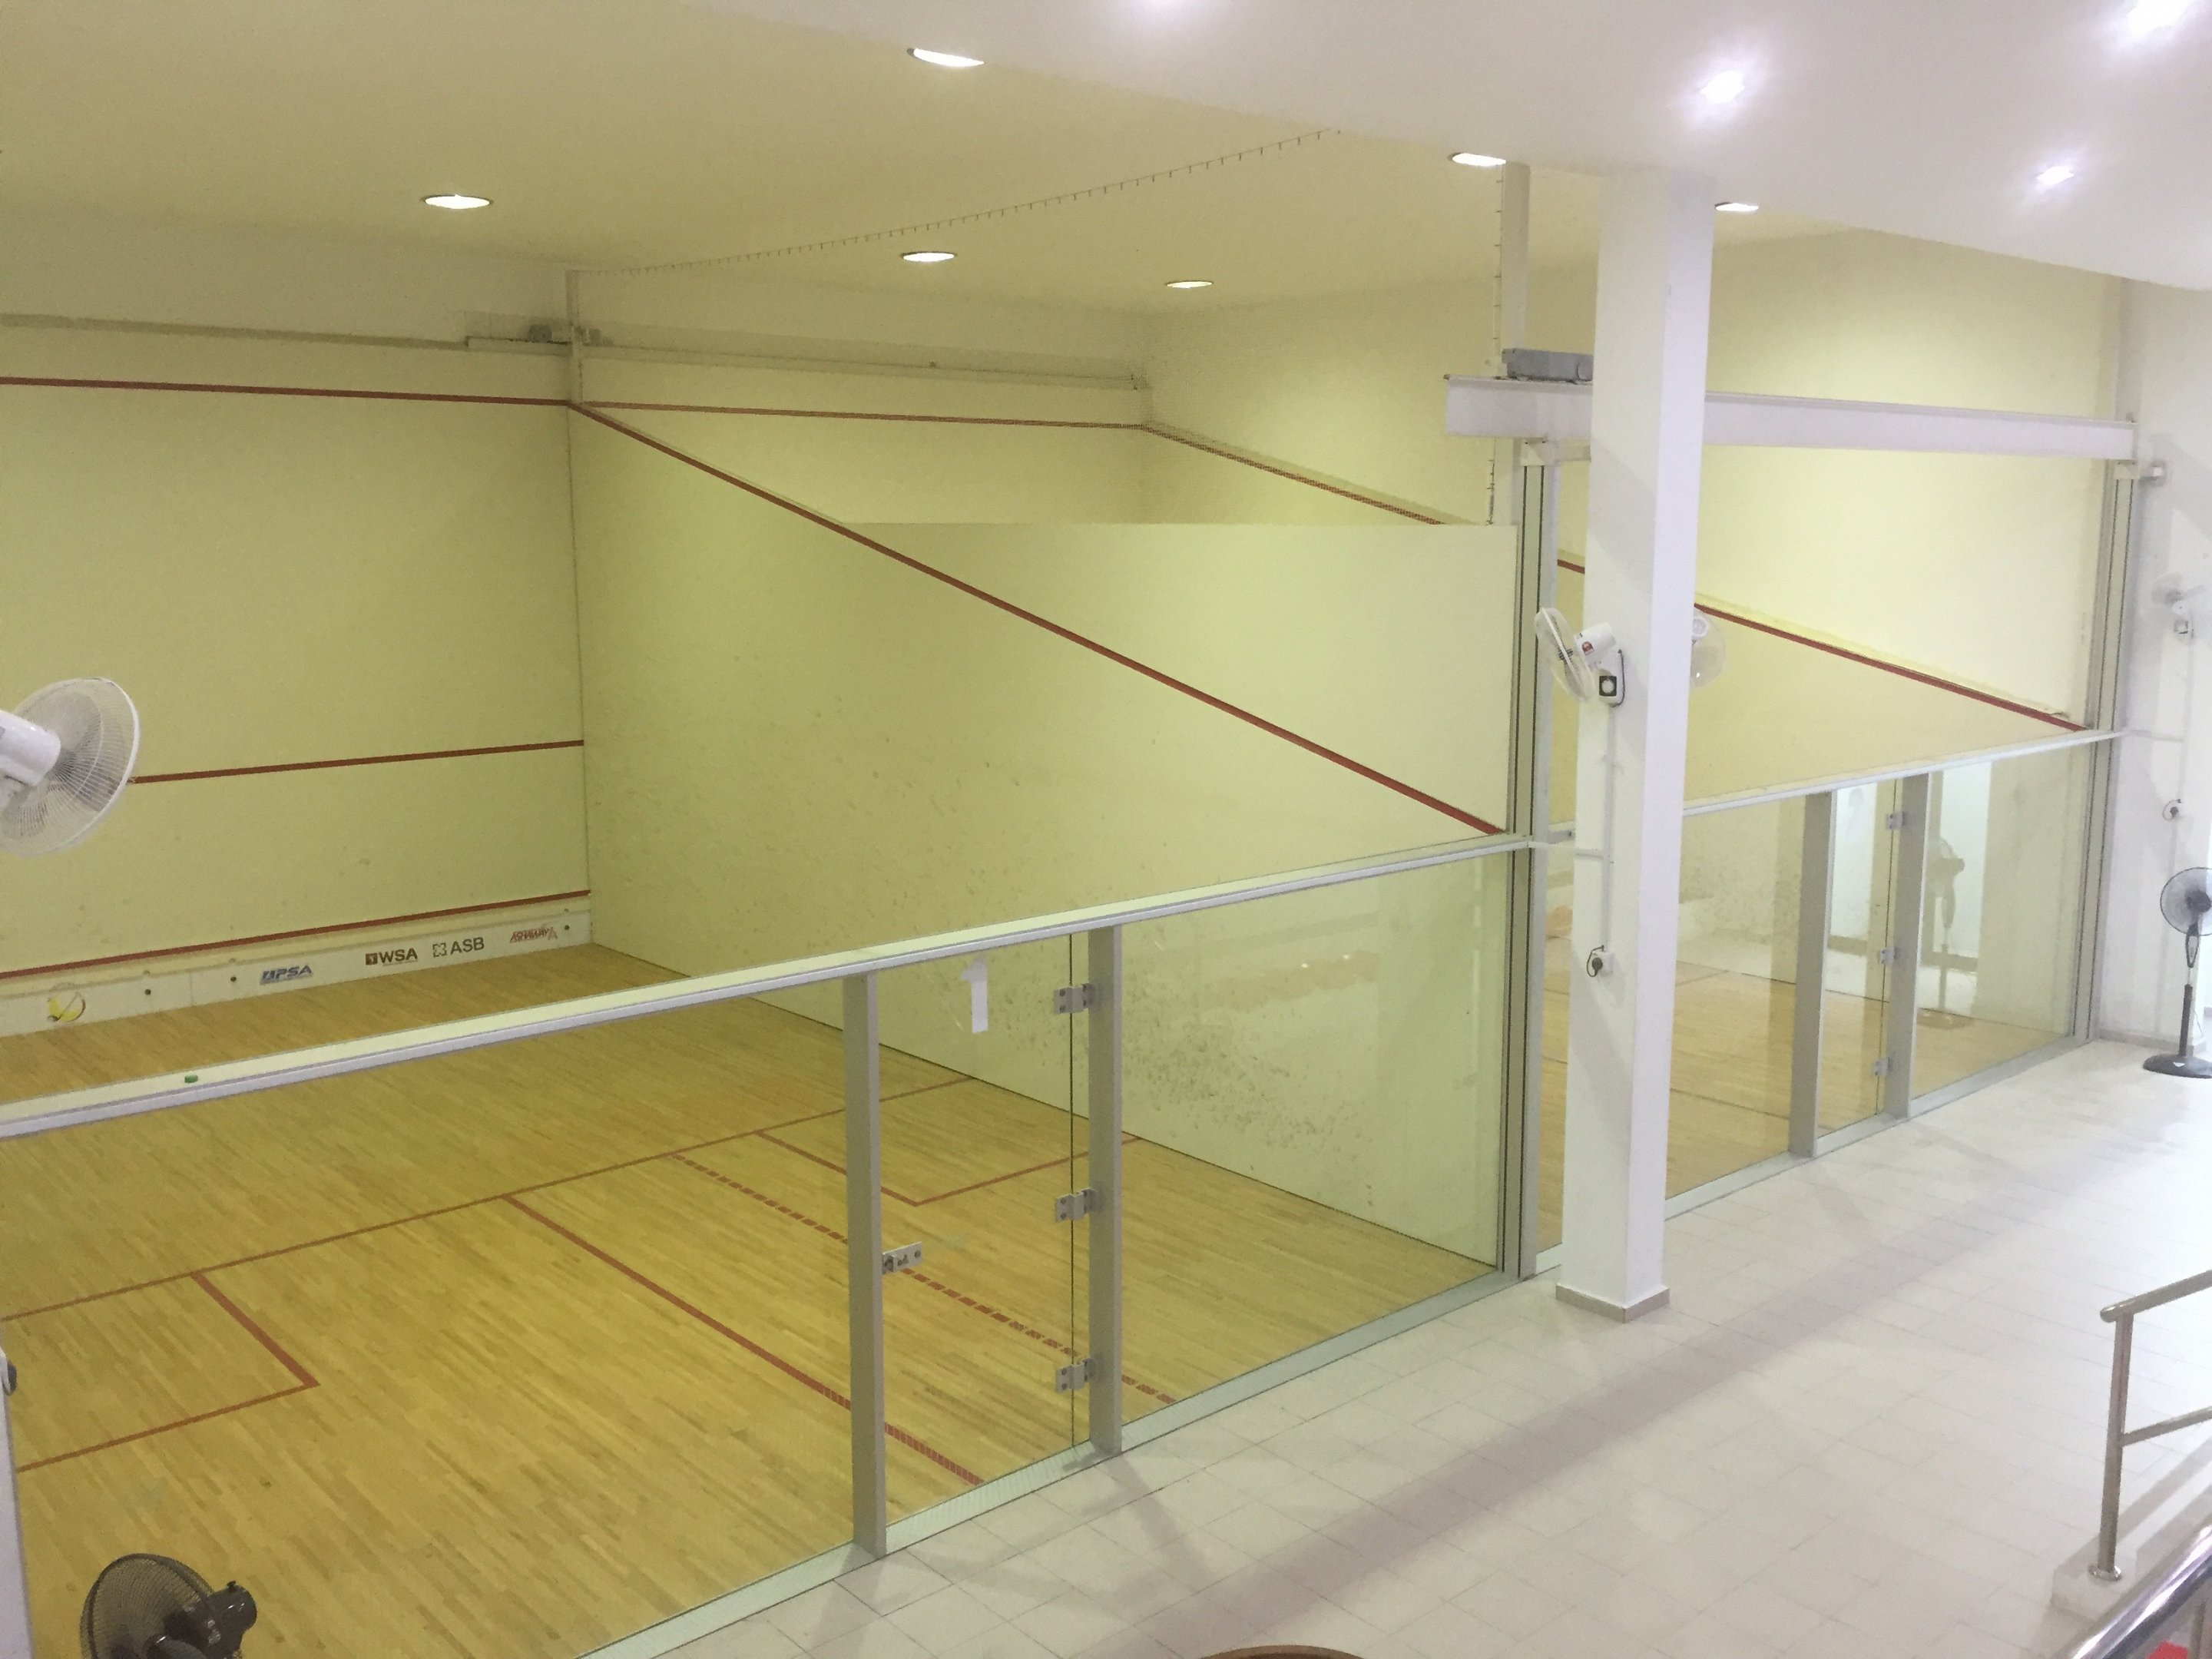 ASB Squash Courts Squash Court Cost: What is the price for a Squash